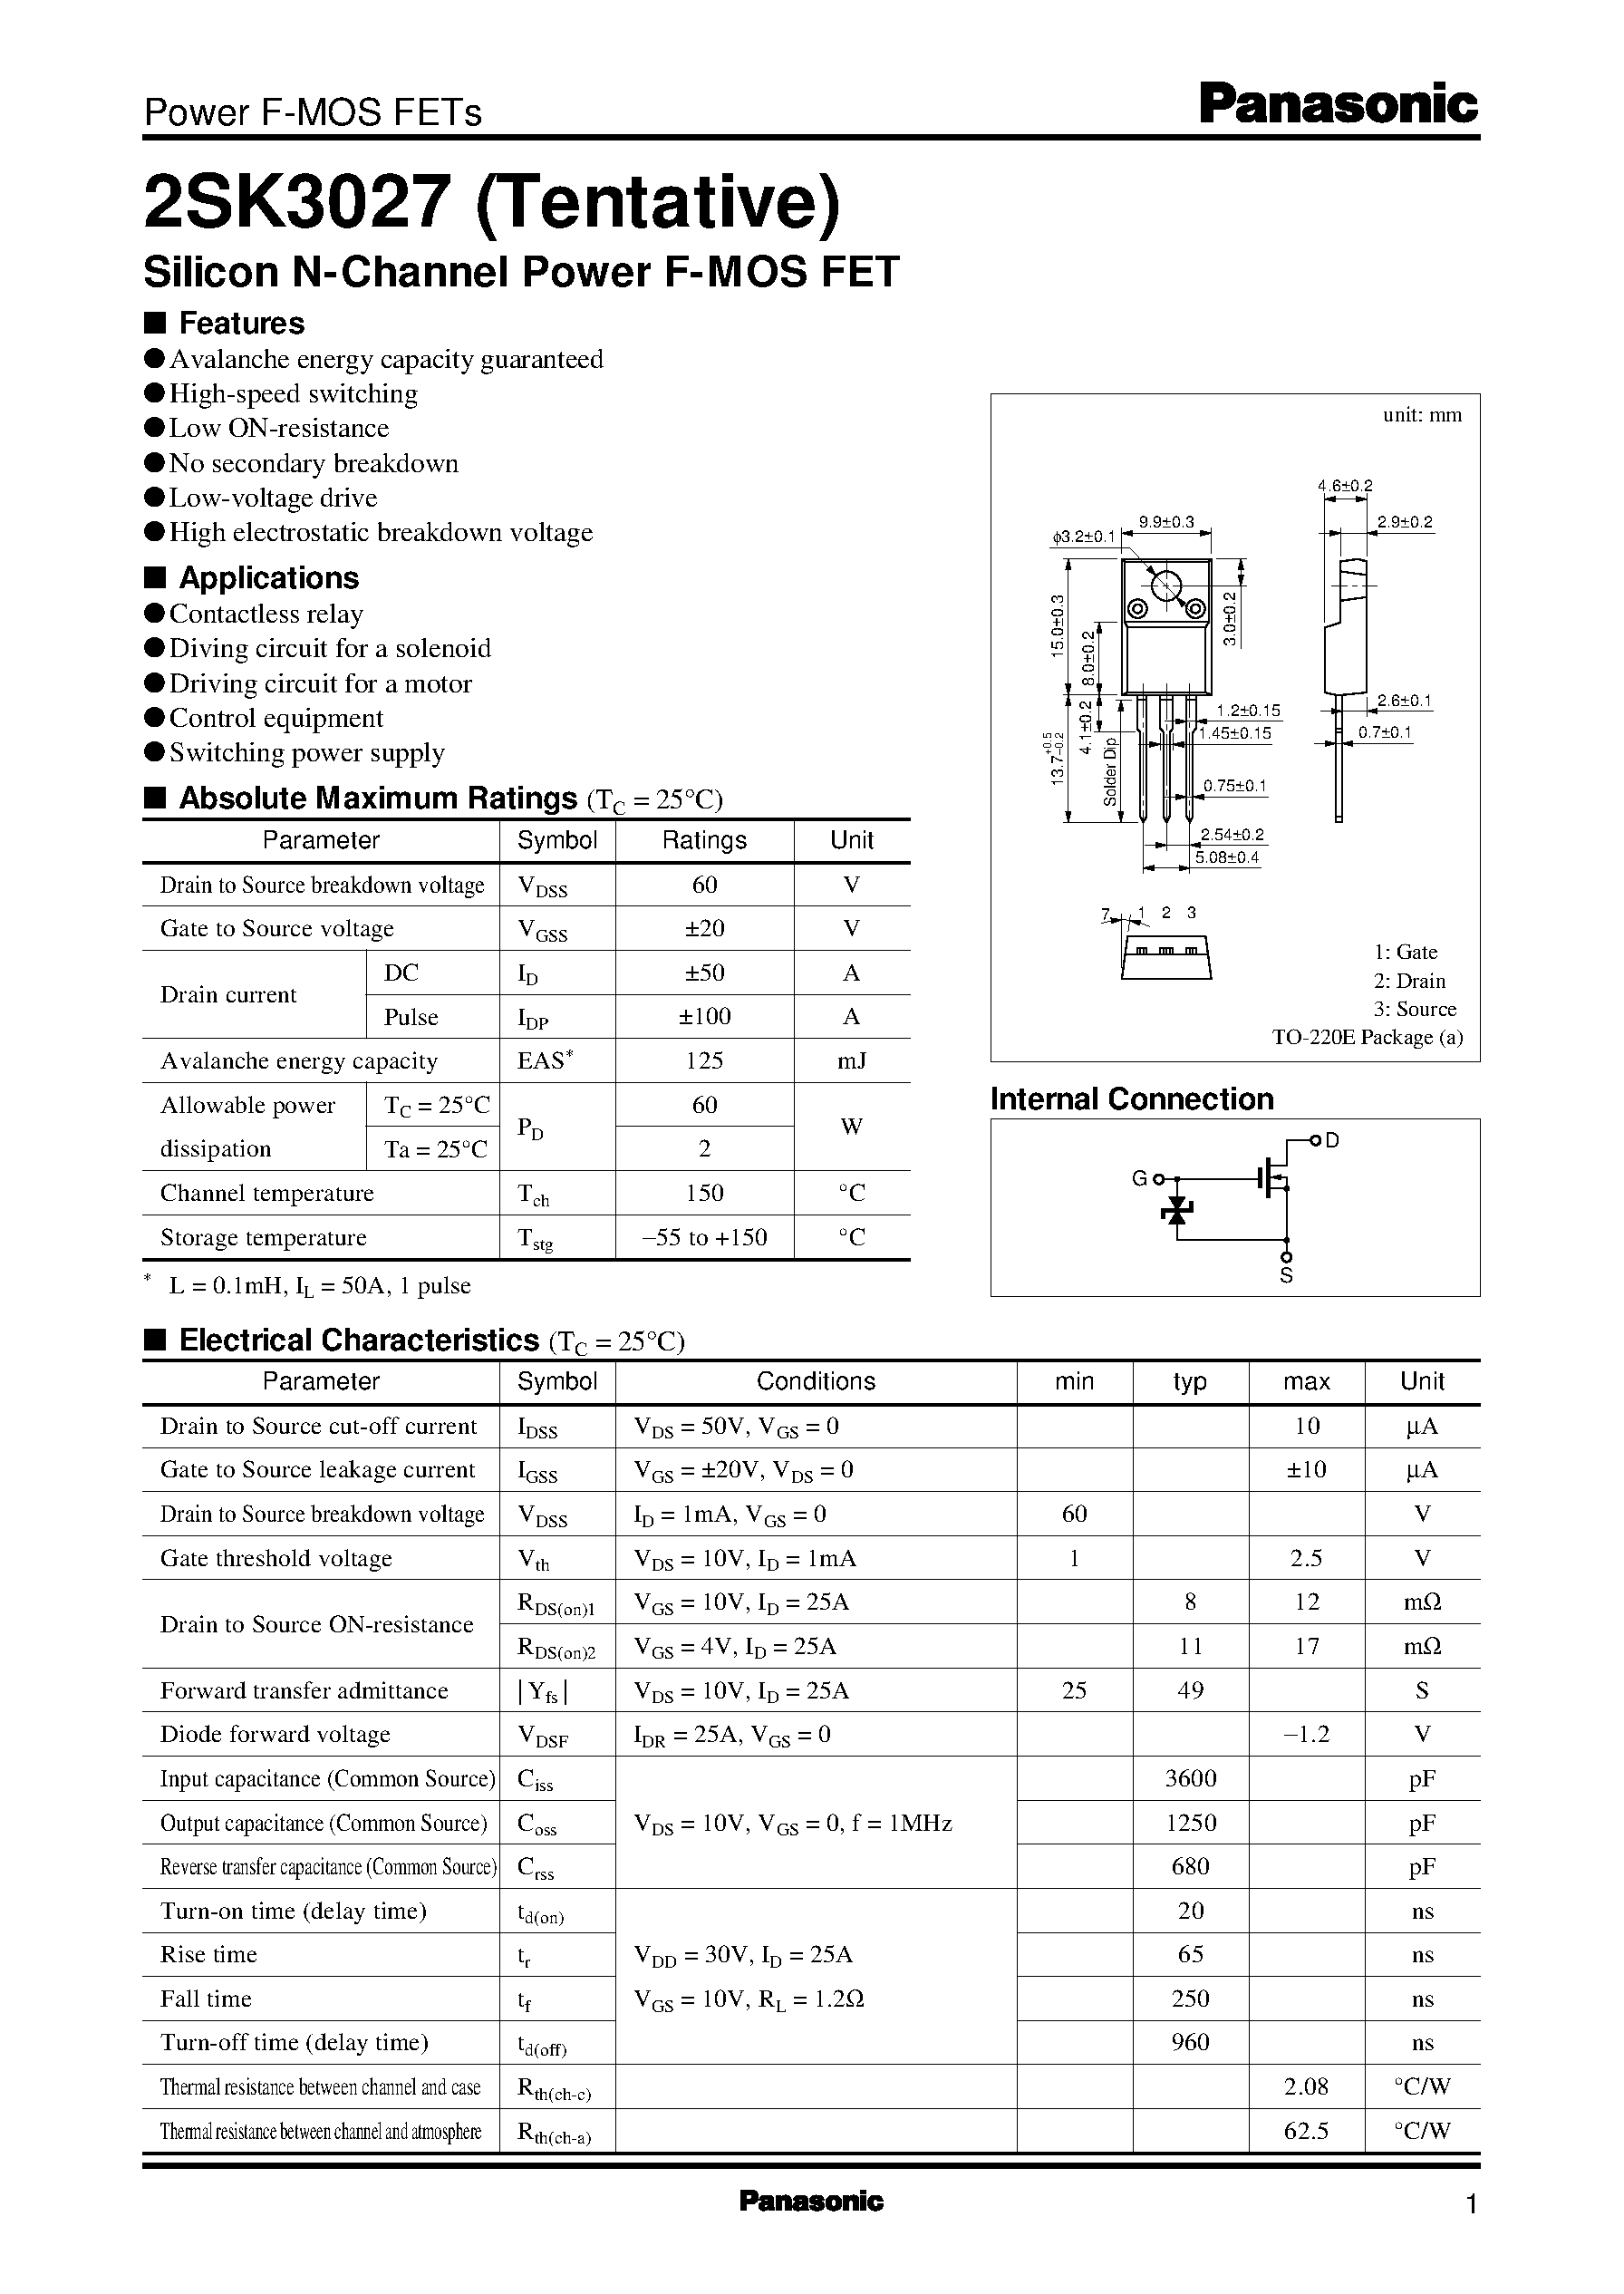 Datasheet 2SK3027 - Silicon N-Channel Power F-MOS FET page 1